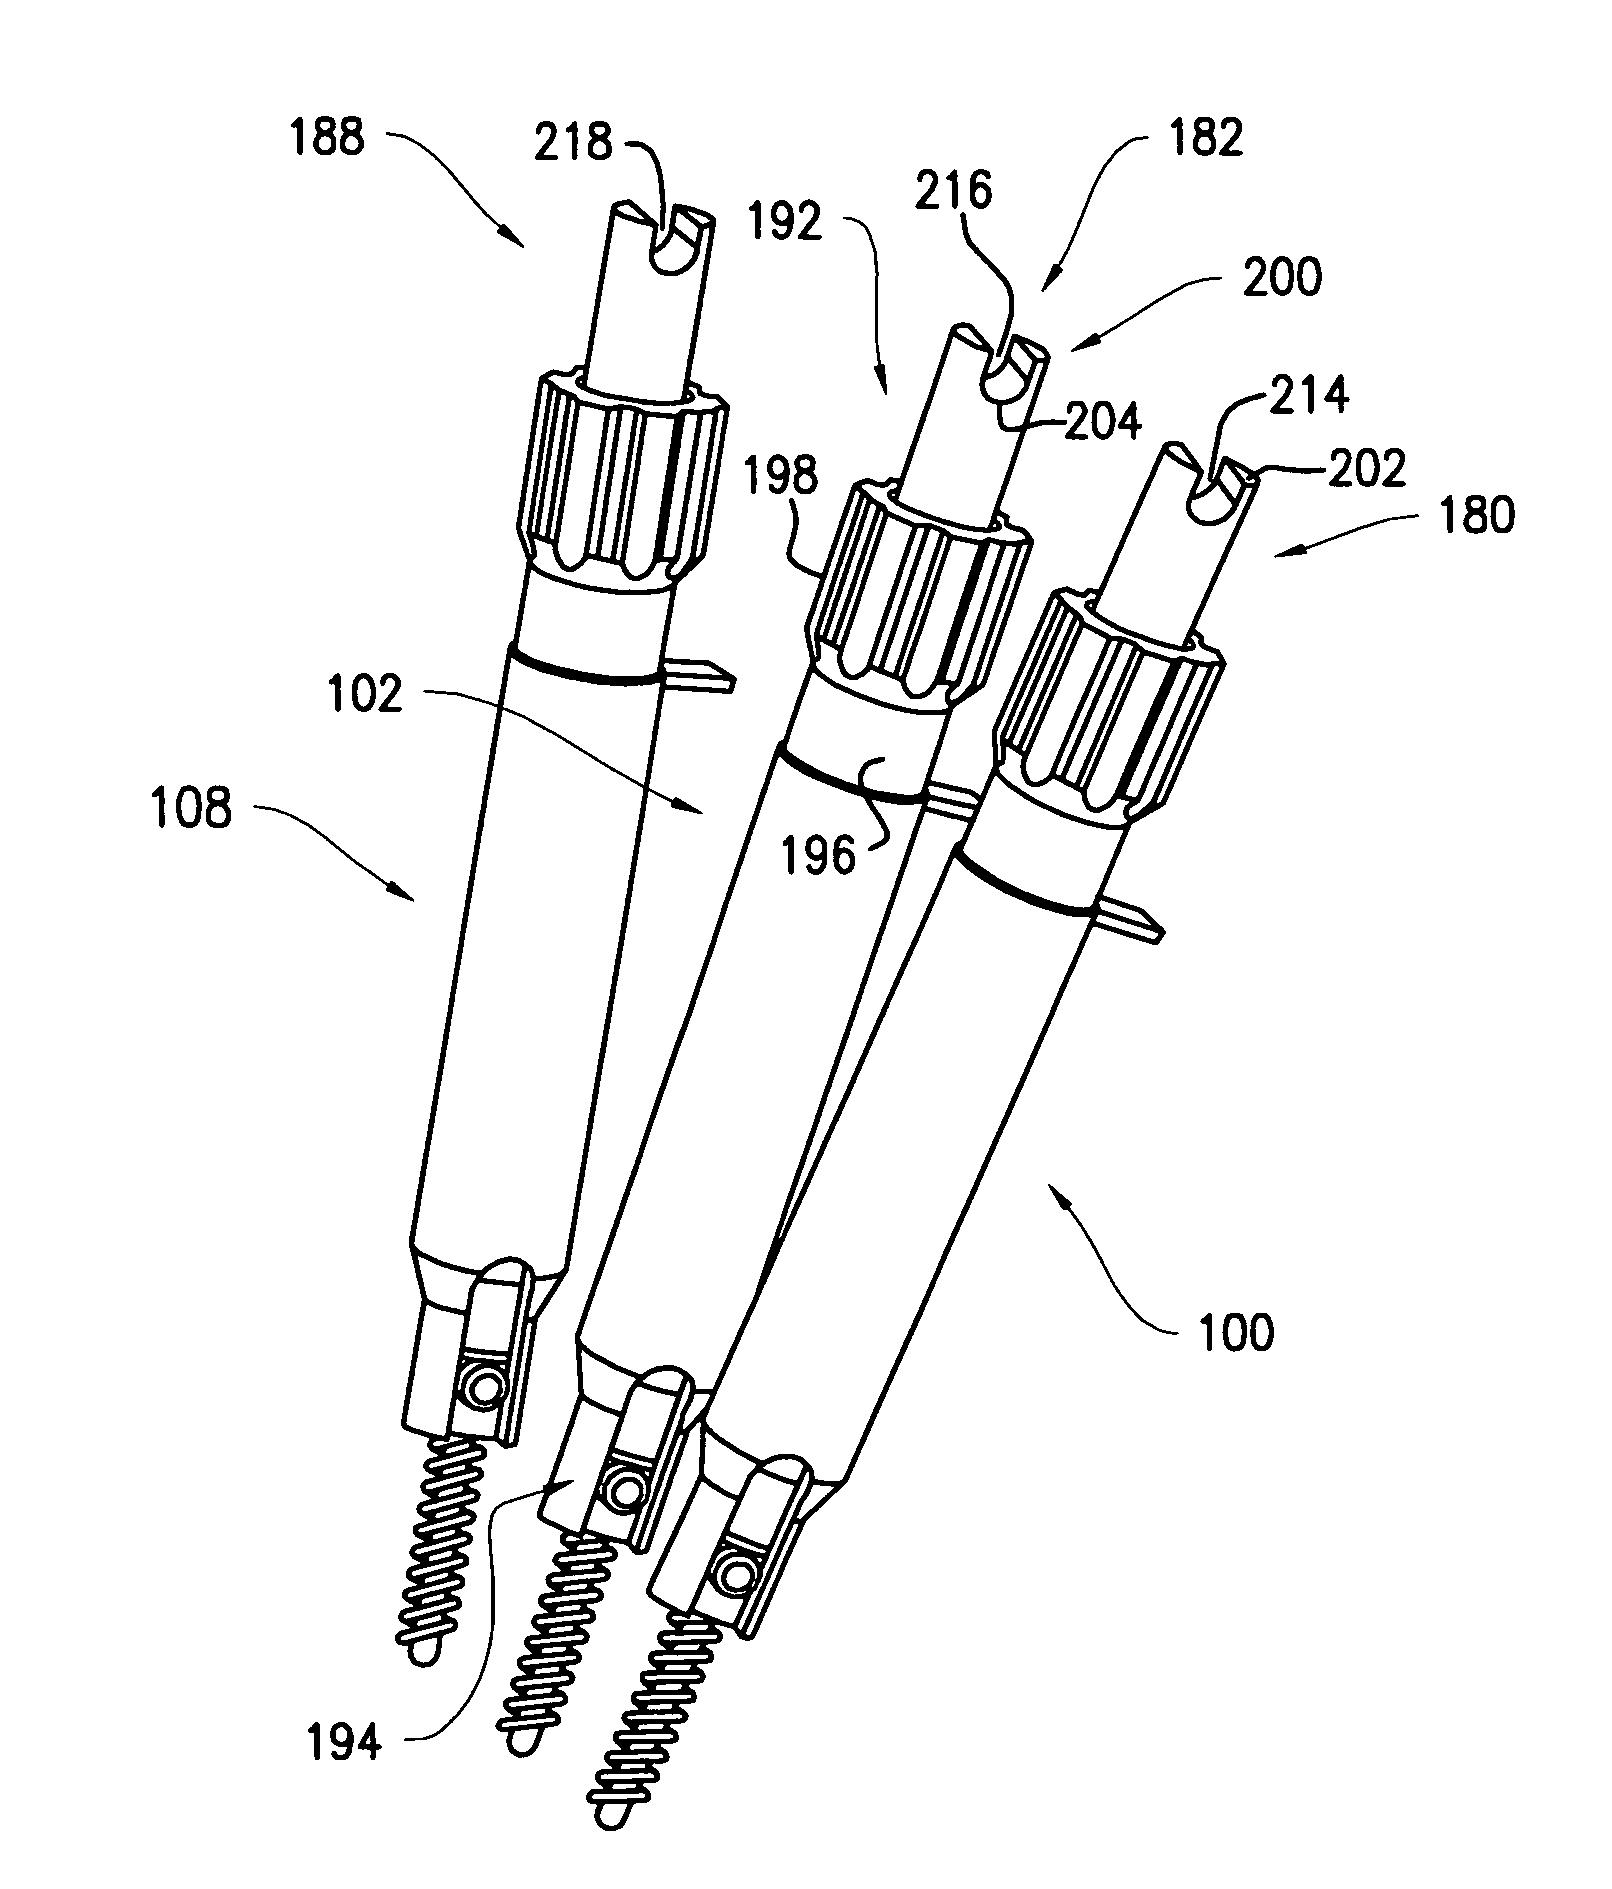 Rod contouring alignment linkage